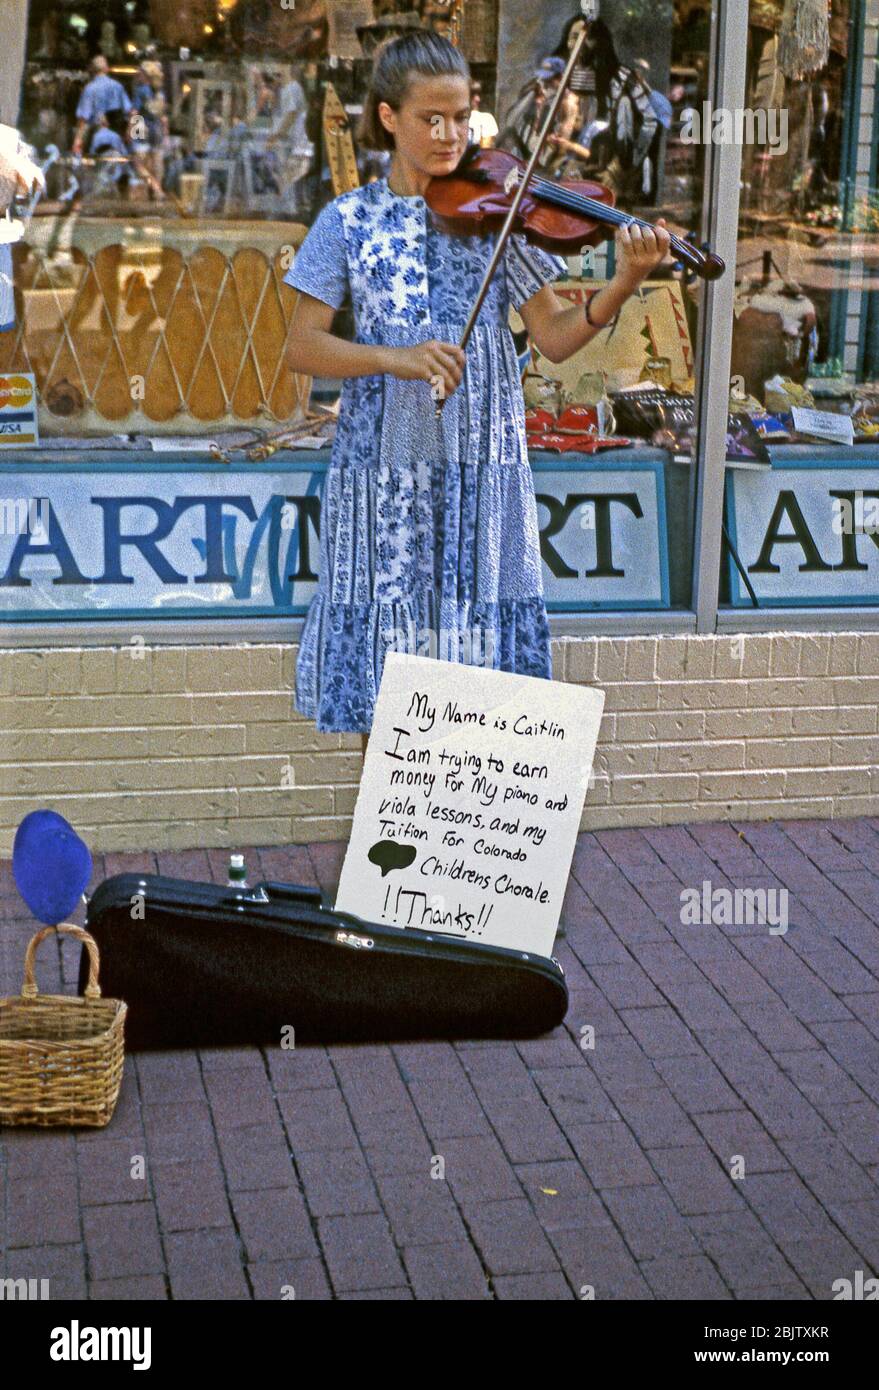 A street musician busking in Denver, Colorado, USA c. 1965. She is playing a violin and a hand-written sign at her feet tells us that she is called Caitlin and is busking to collect money to pay for piano and viola lessons plus tuition for the Colorado Childrens' Chorale. She has also drawn a big heart on it. Stock Photo